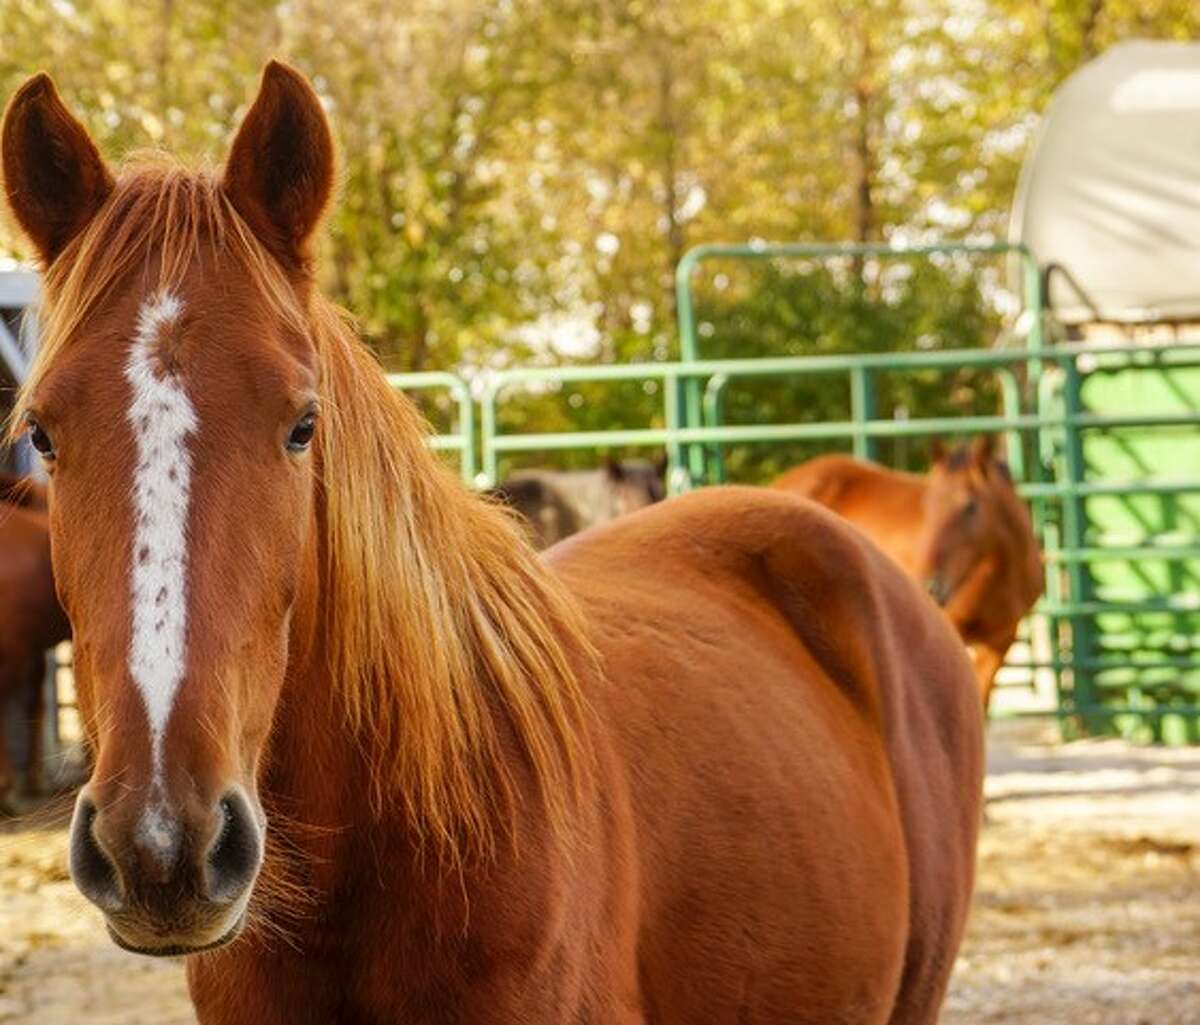 Dottie, a wild mustang currently living at the Legendary Mustang Sanctuary, available for adoption.